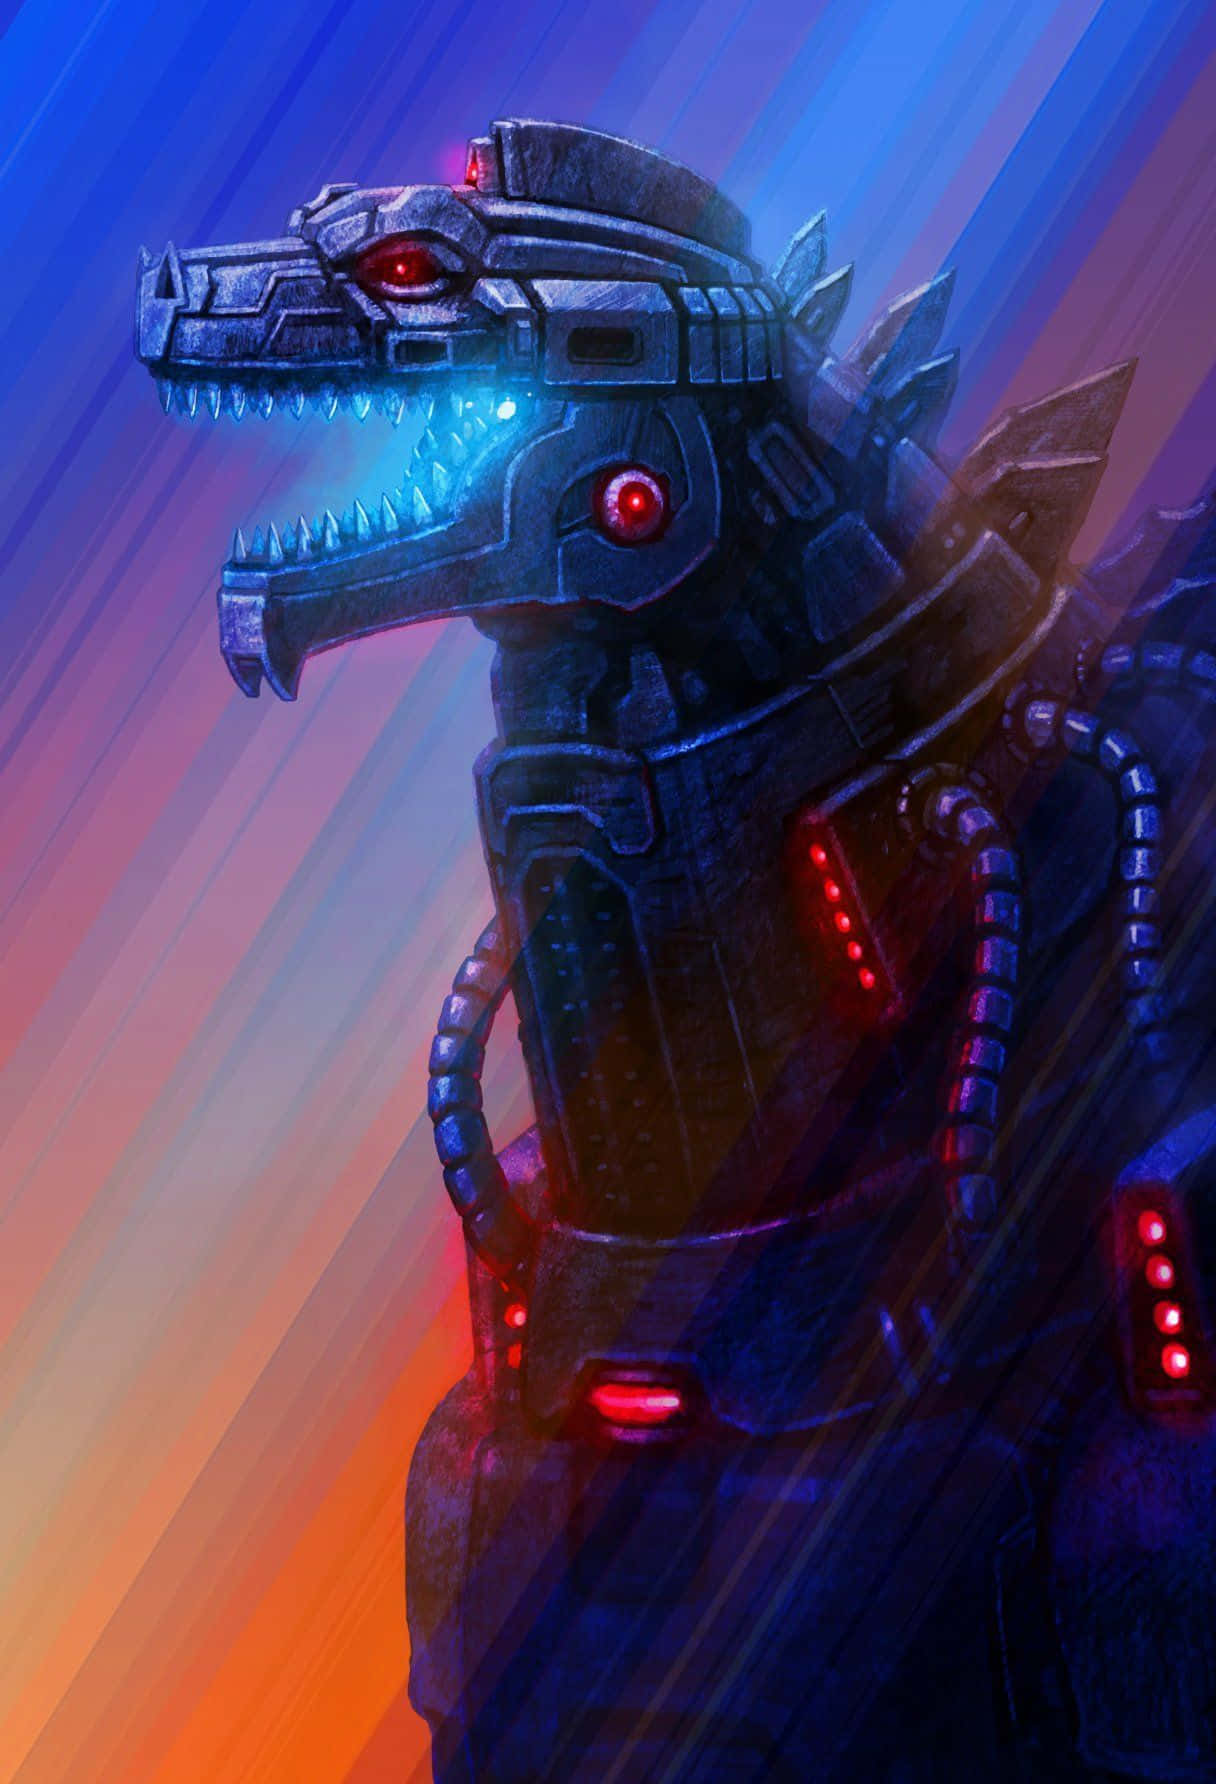 The magnificent Robot Godzilla in action Wallpaper